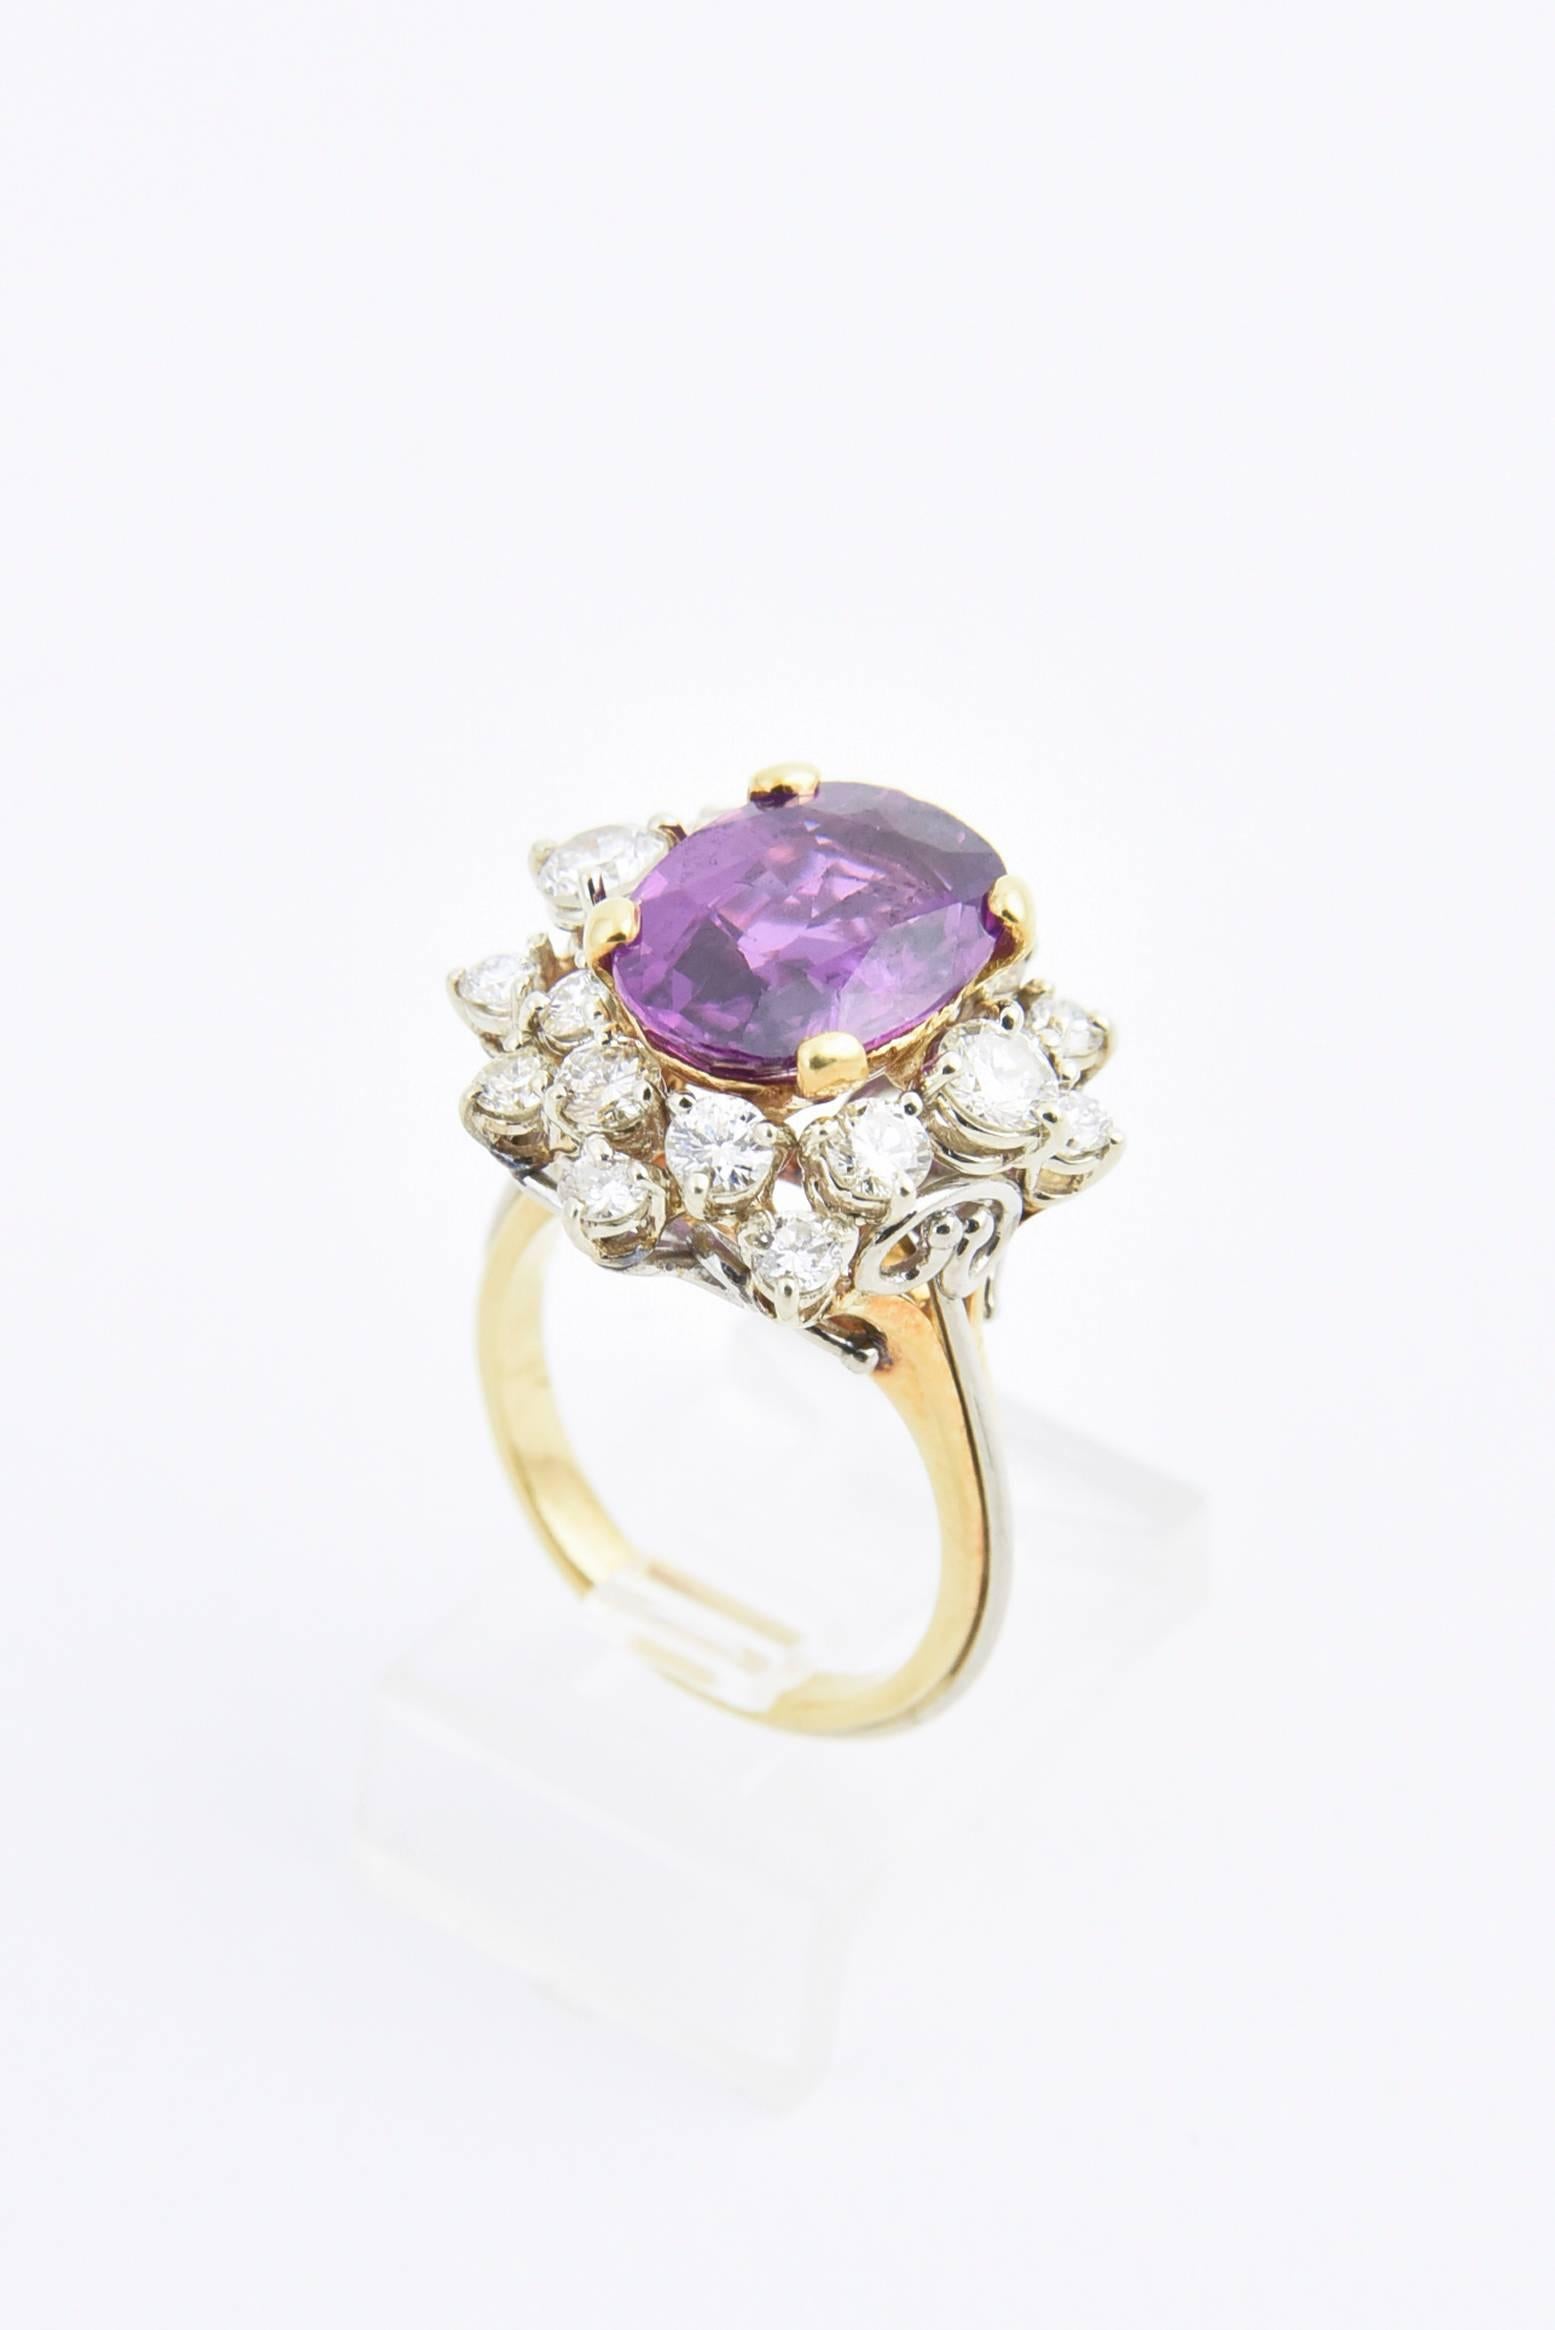 4 Carat Oval Pinkish Purple Sapphire Diamond Gold Cocktail Ring with GIA Cert For Sale 3